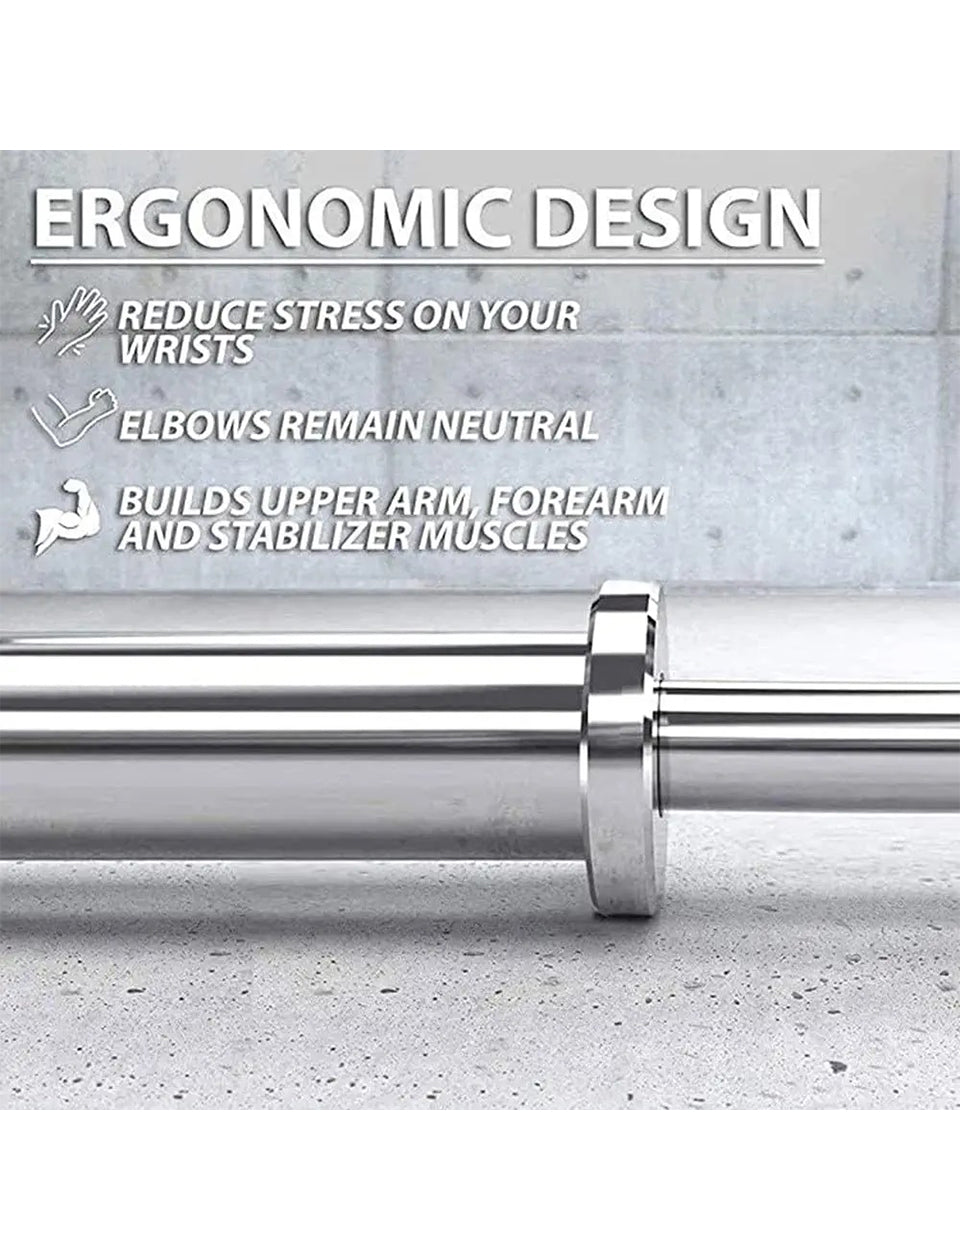 Olympic Straight Bar-great ergonomic design that reduces stresses on your body and keeps your muscles stable.